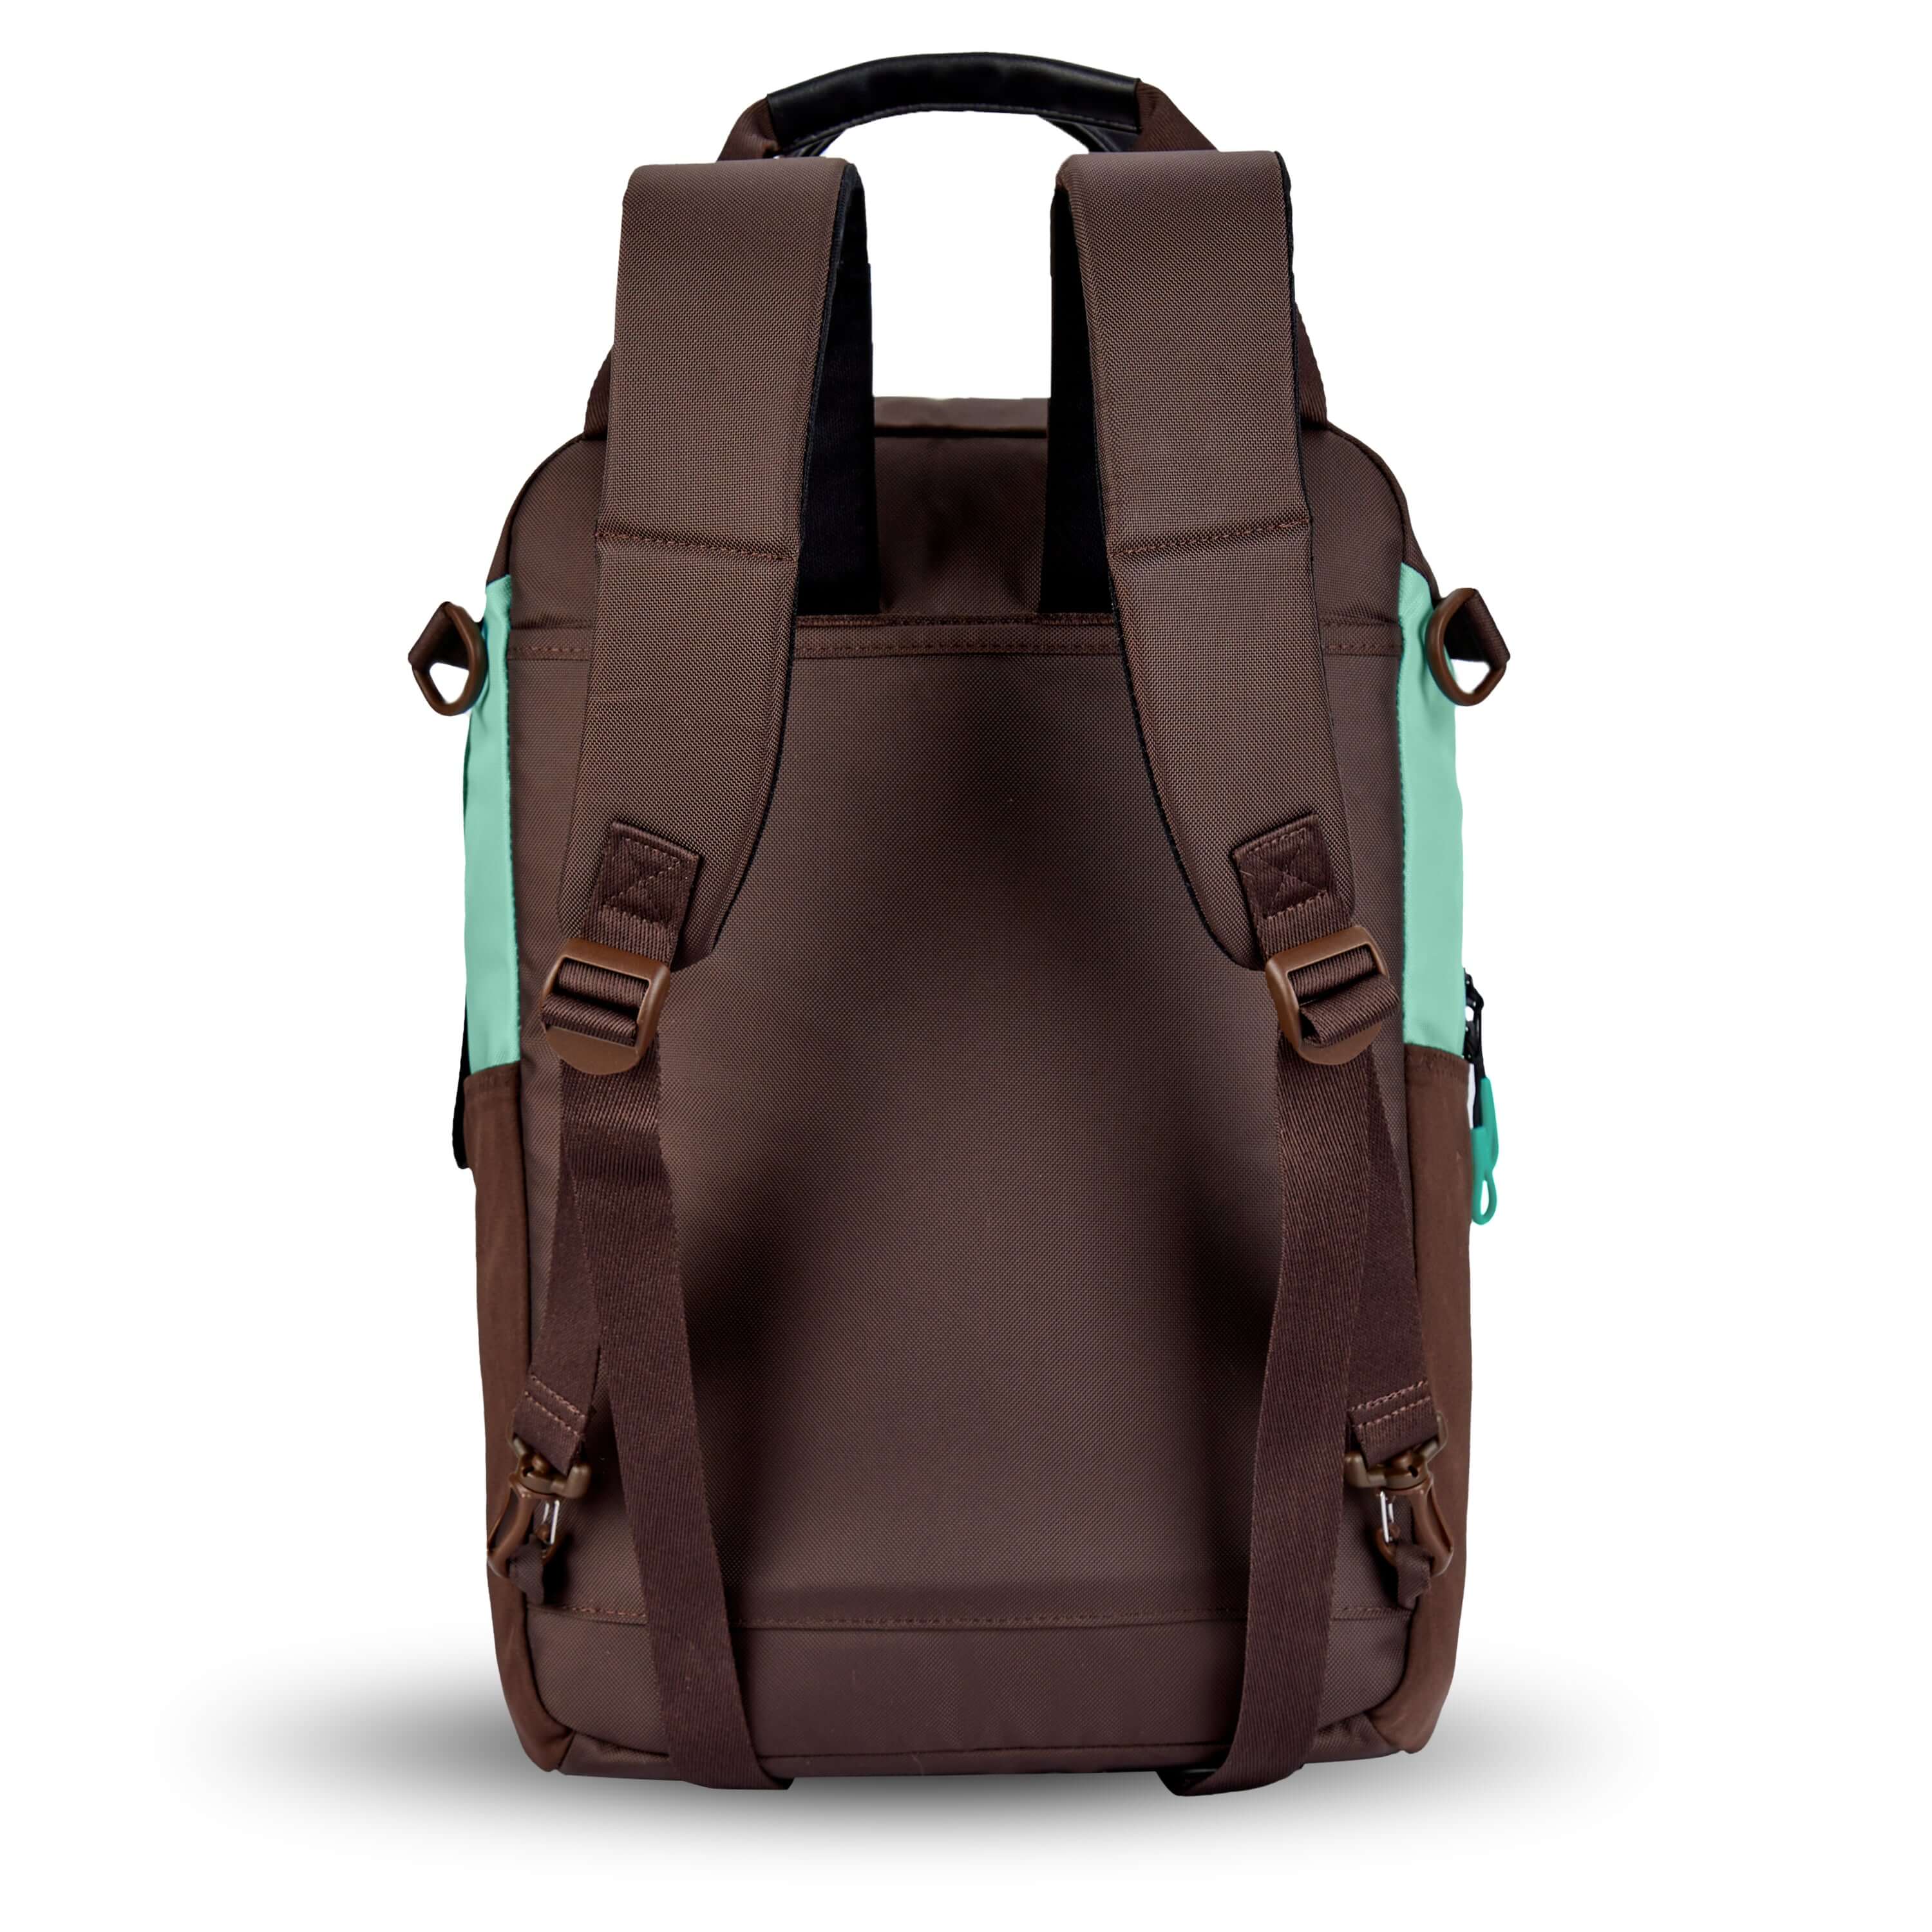 Back view of Sherpani's three-in-one bag, the Camden in Seagreen. The back of the bag is entirely brown. An elastic water bottle holder sits on either side of the bag. The bag has padded/adjustable backpack straps and short tote handles fixed at the top. 